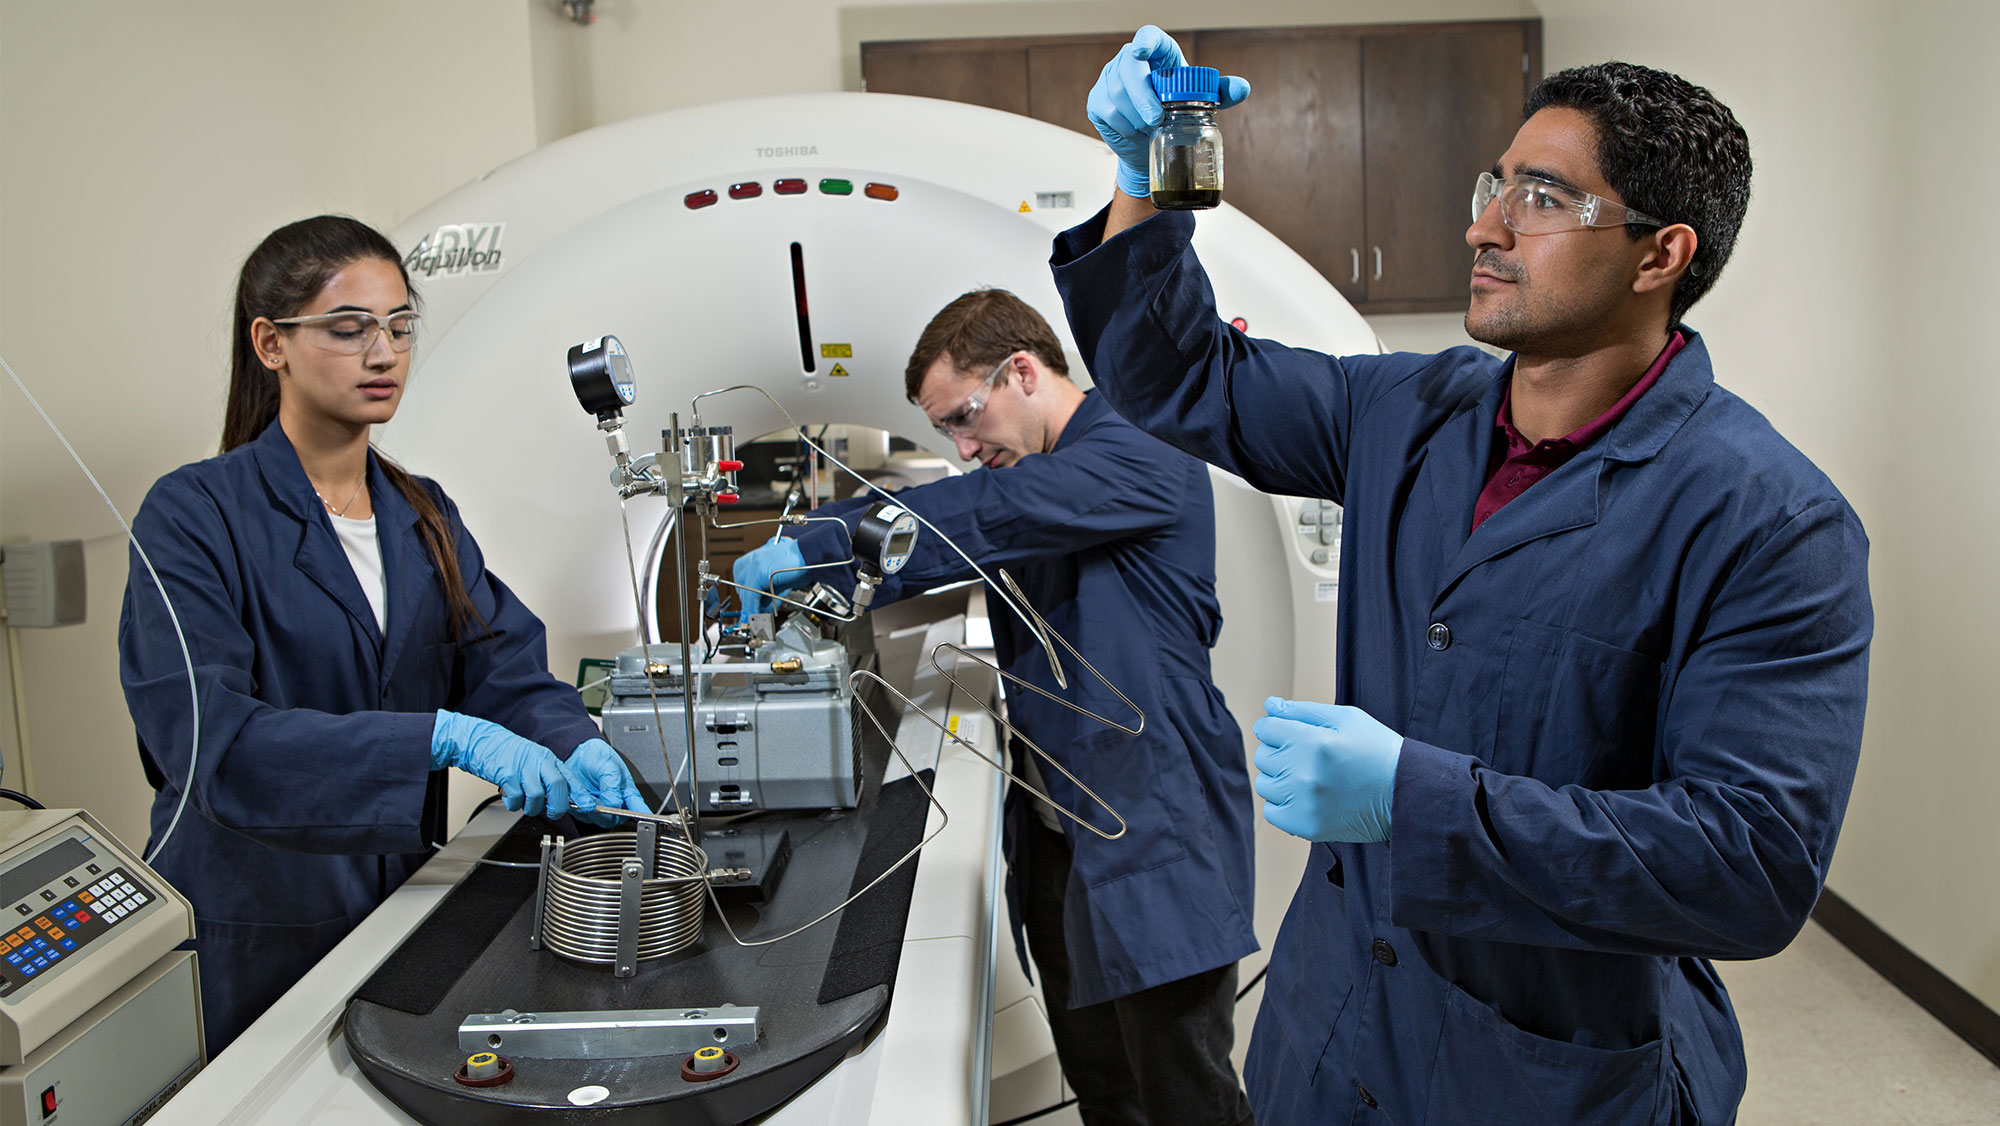 Petroleum engineering students working in the Chevron Petrophysical Imaging Laboratory